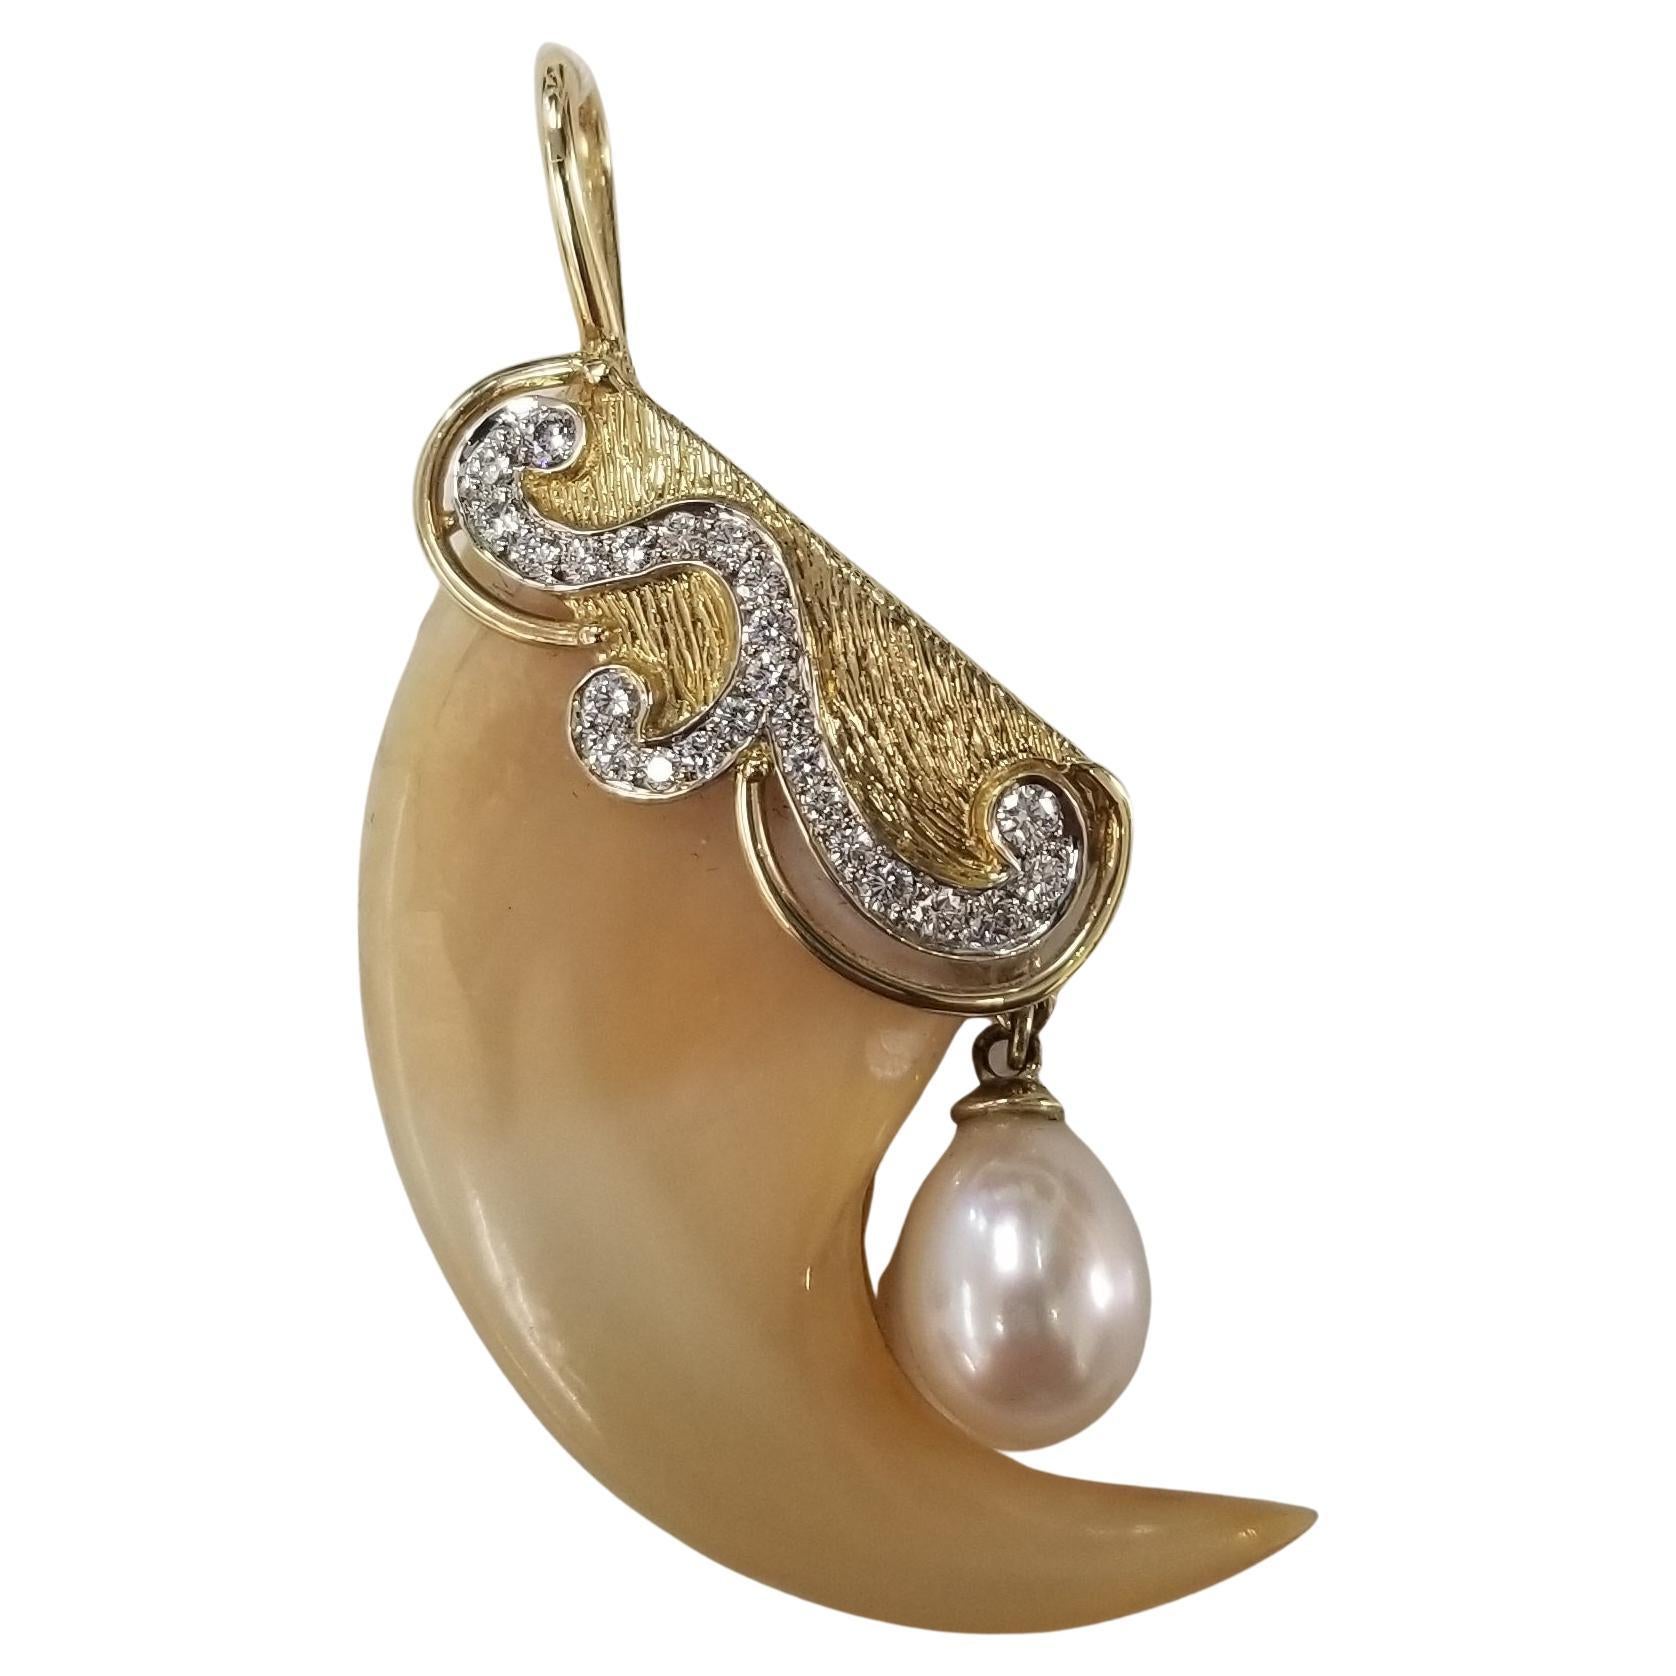 Madleine Kay 14k Yellow Gold "Lion Claw" Paved in Diamonds with a Cultured Pearl